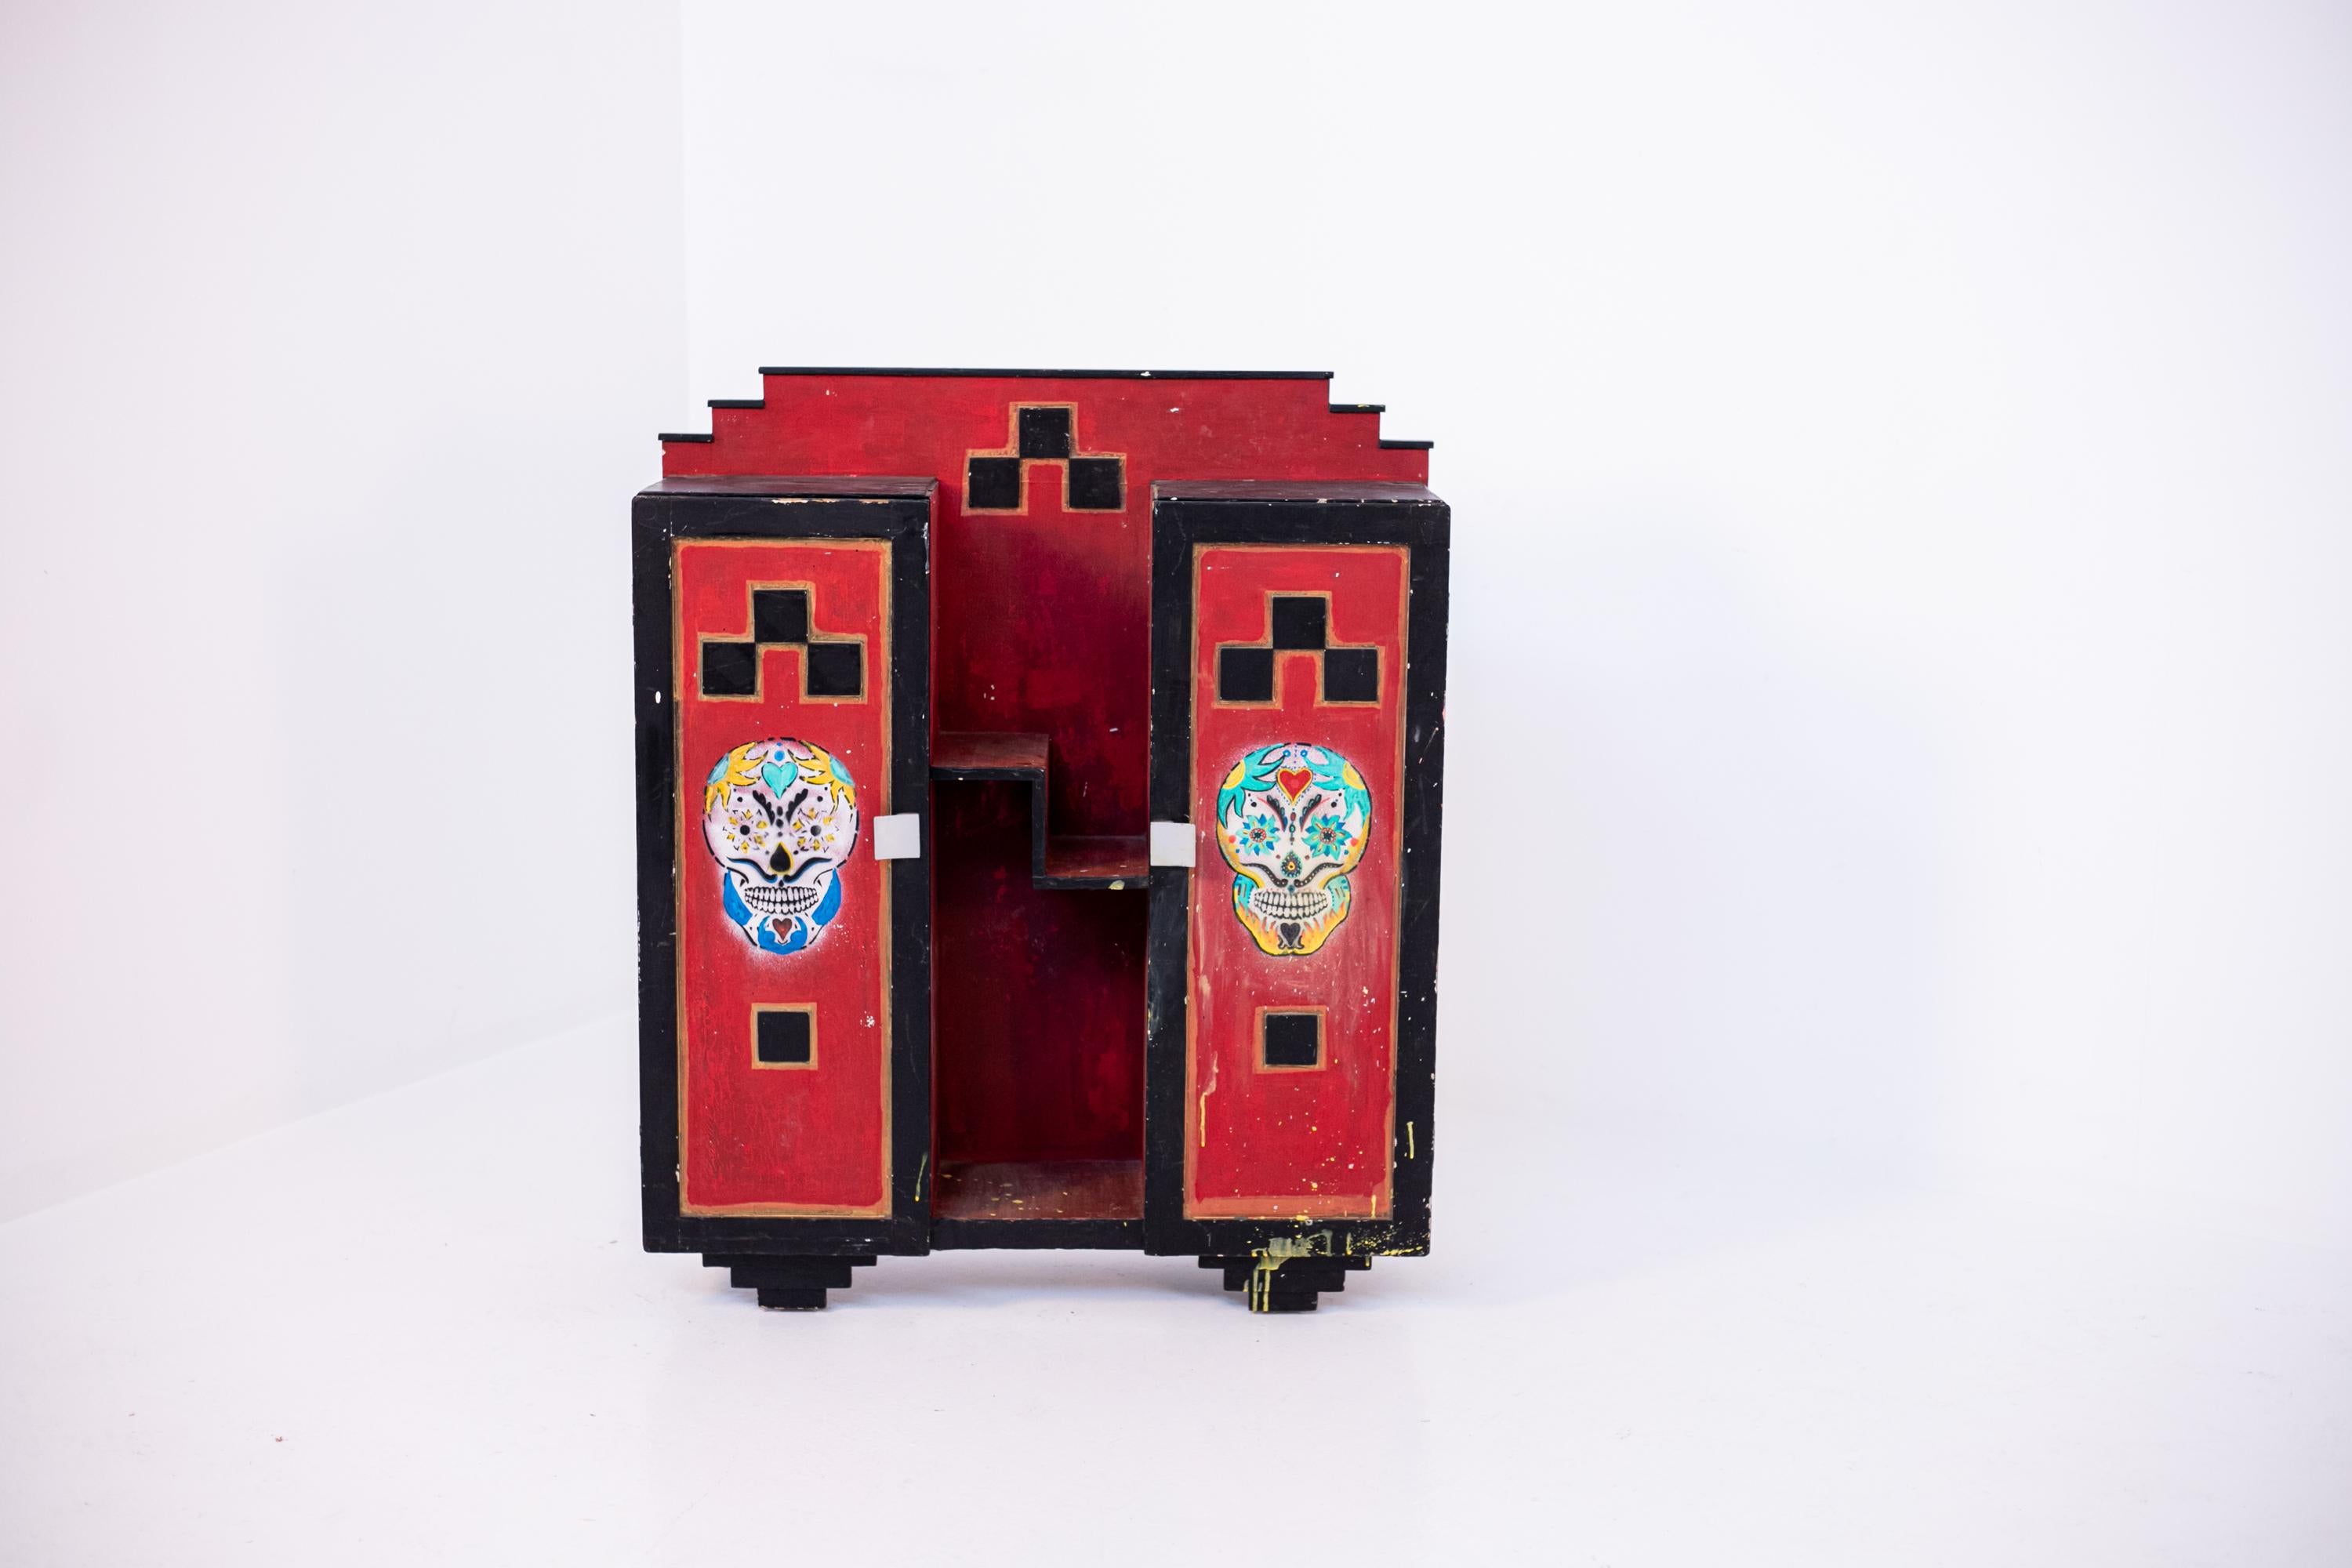 Eccentric Italian futurist showcase cabinet from the 20's. The cabinet has applications inserted later, such as skull-shaped designs and designs on the sides of the cabinet in the shape of a sword. The cabinet is made with well-defined and geometric